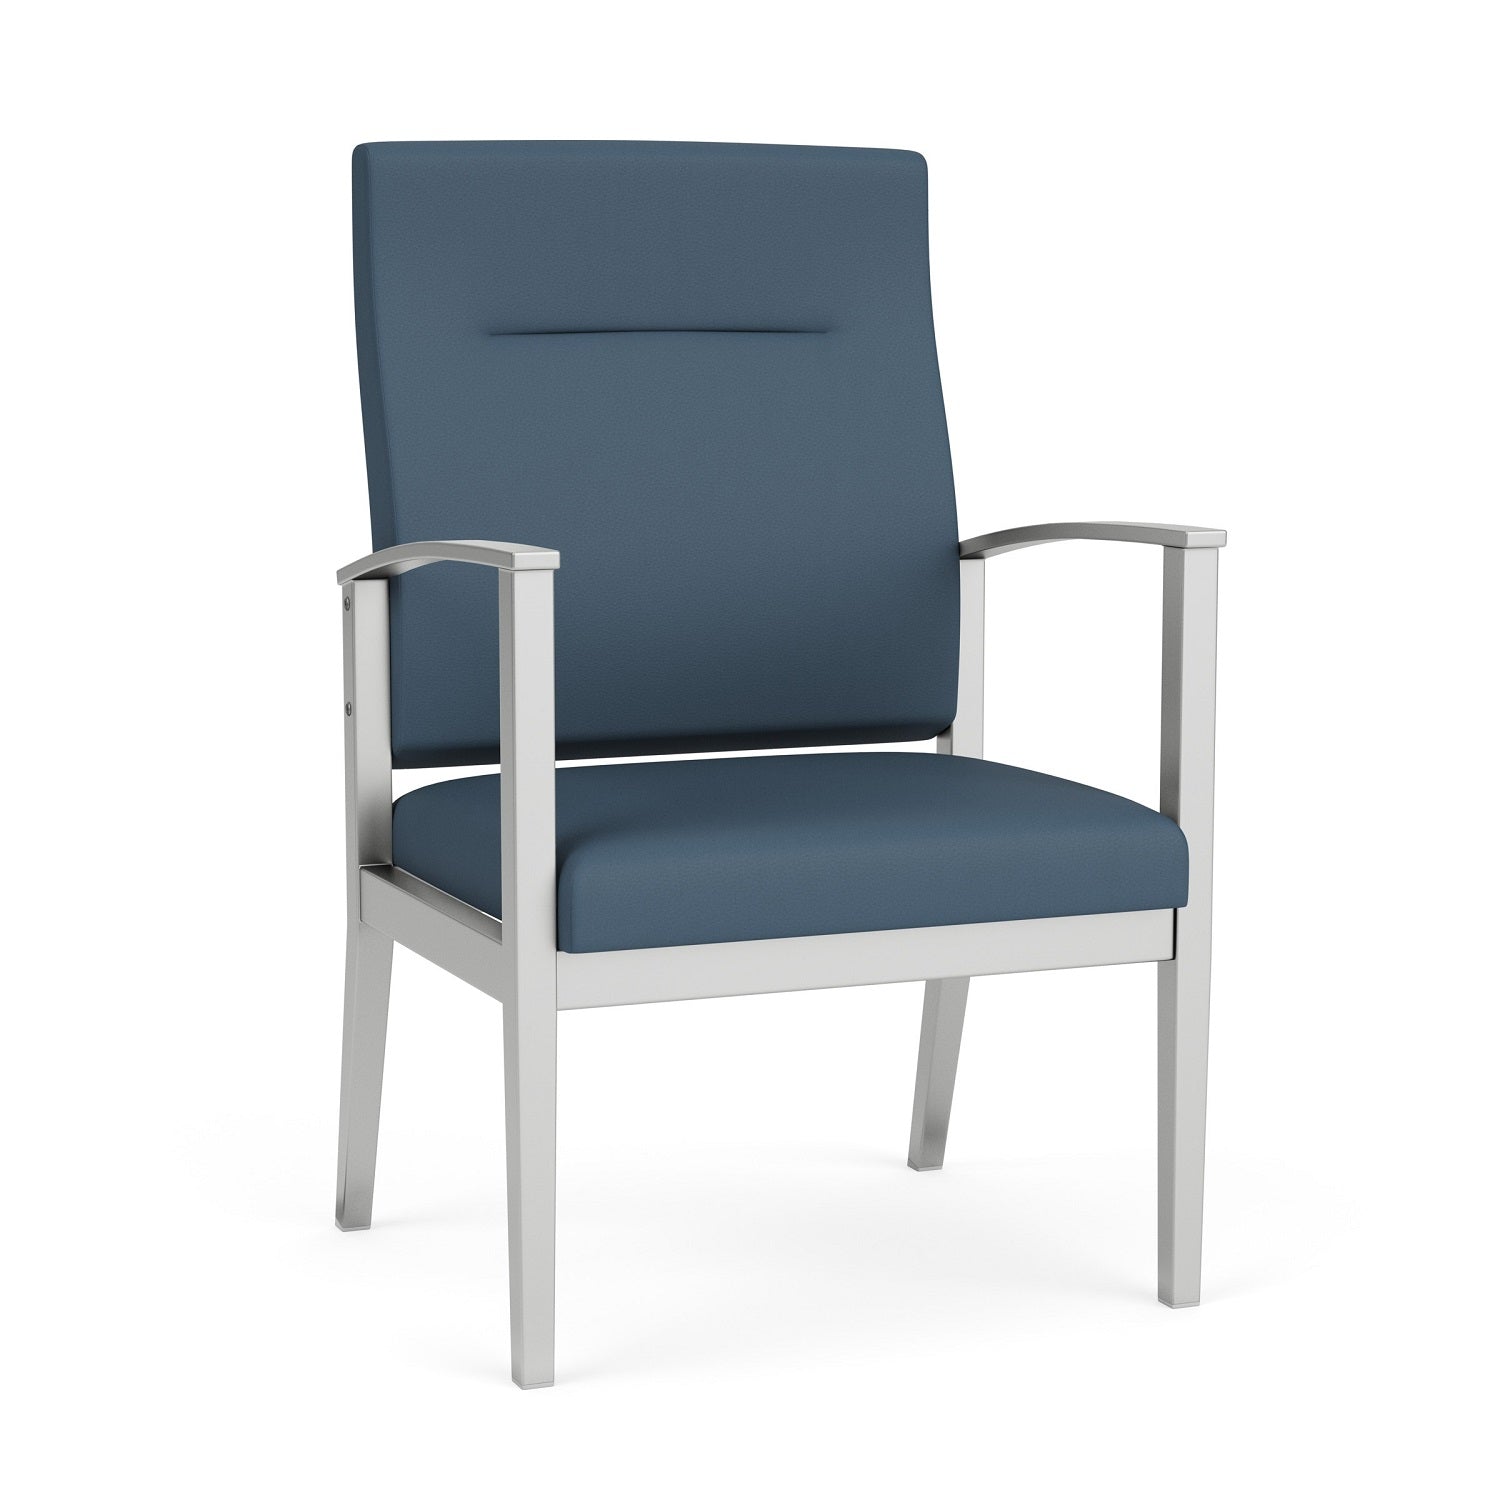 Amherst Steel Collection Reception Seating, Patient Oversize Chair, High Back, Standard Vinyl Upholstery, FREE SHIPPING